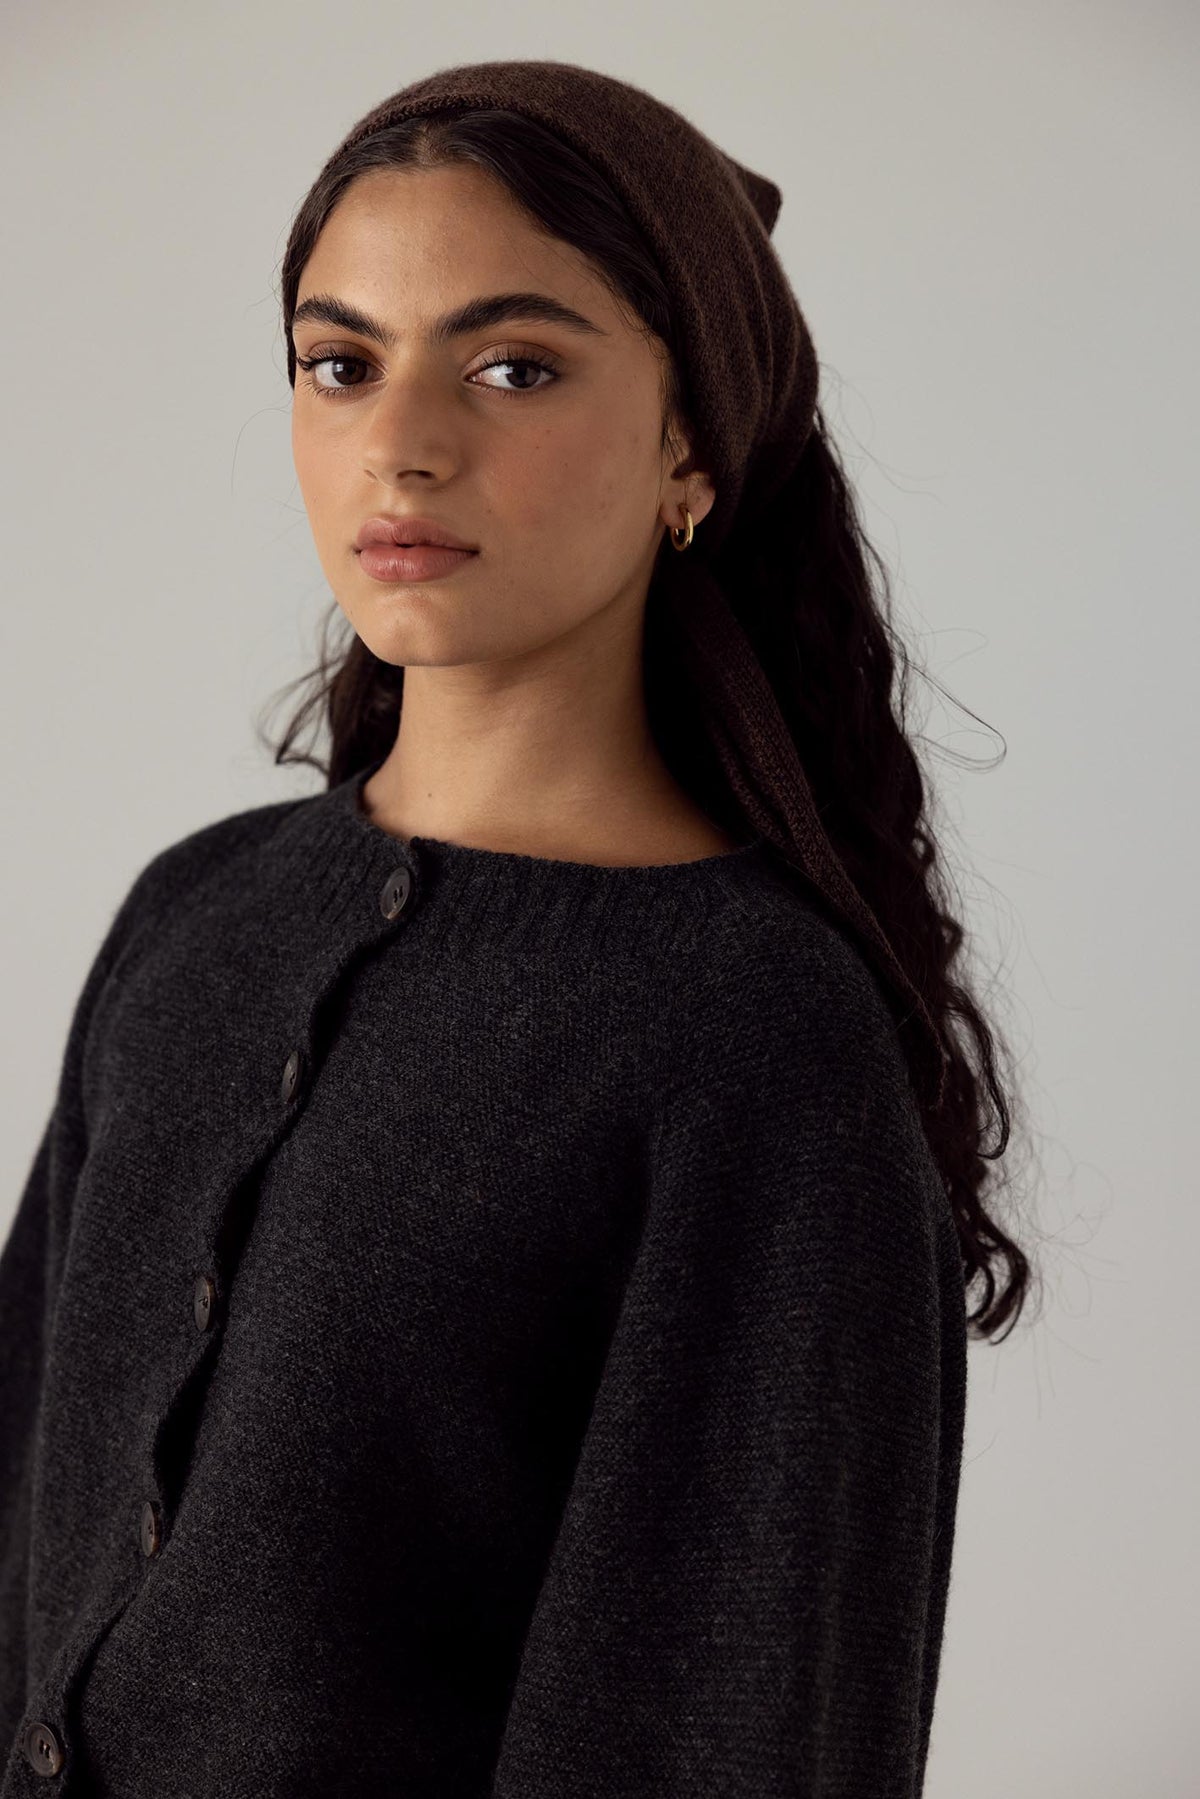 The model is wearing a black Merino Wool sweater and a black Francie Daisy Scarf – Cocoa headband.